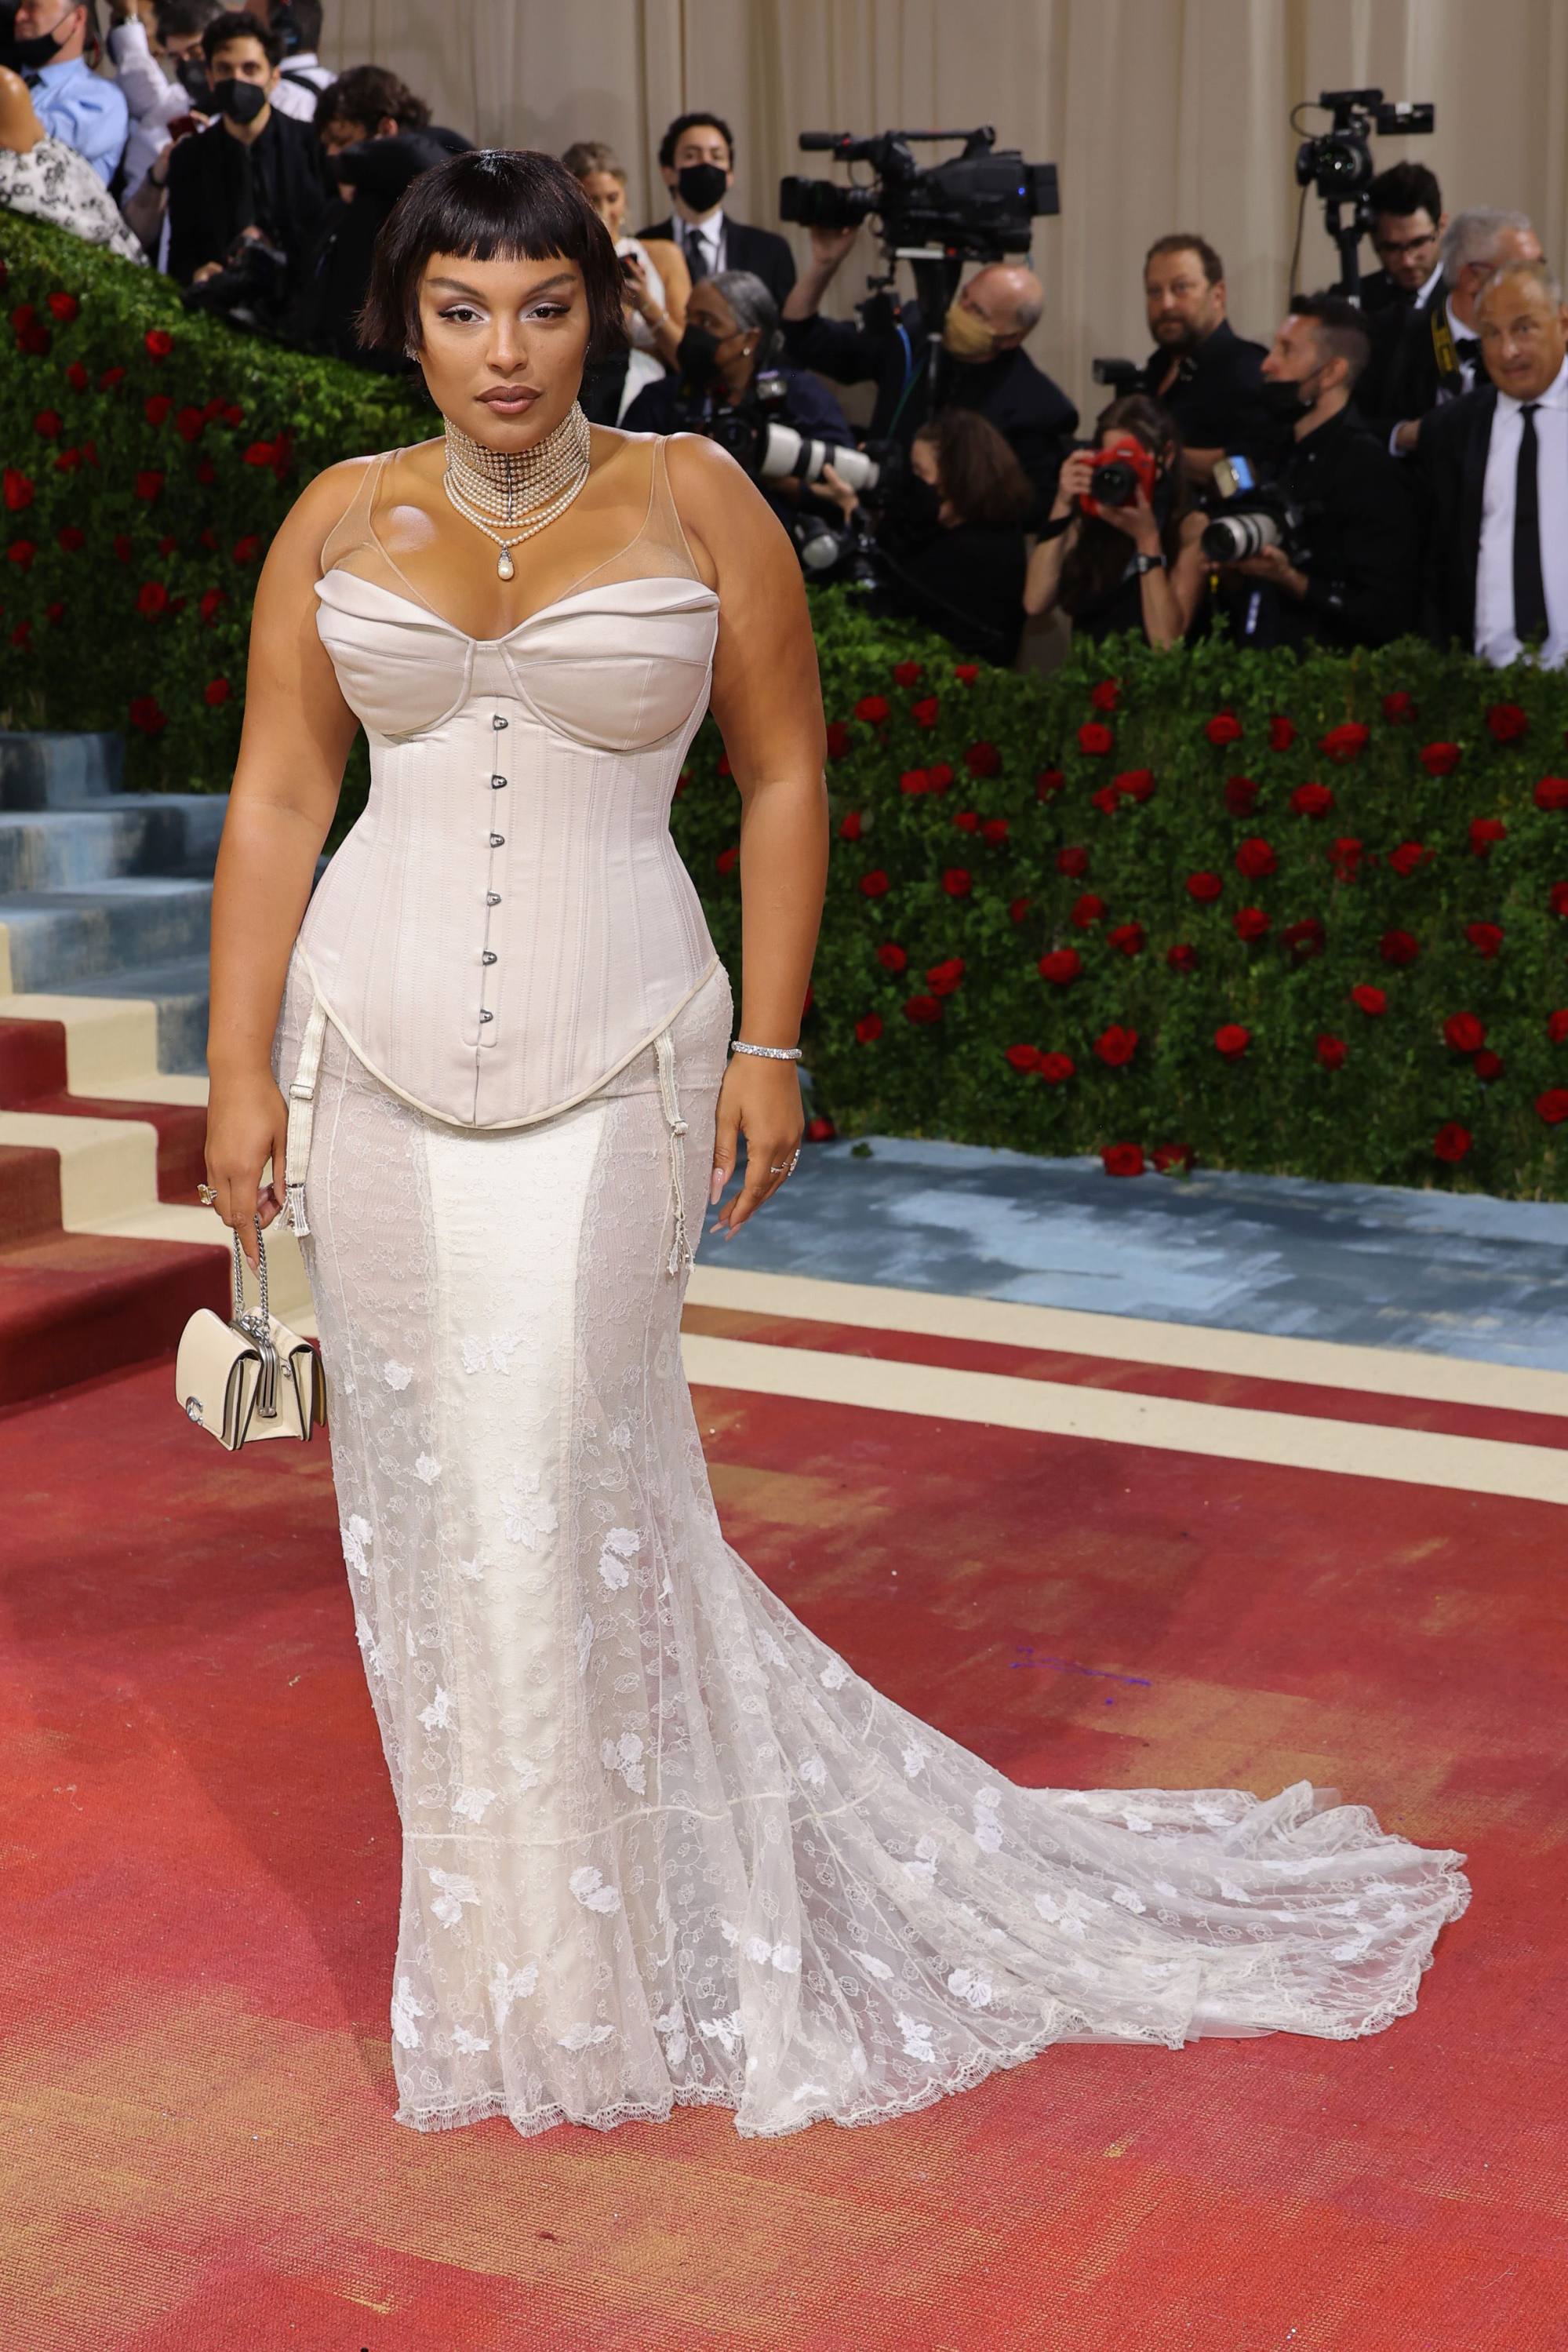 Paloma Elsesser opted for Coach during her red carpet appearance at the Met Gala 2022. Photo: Getty Images/AFP